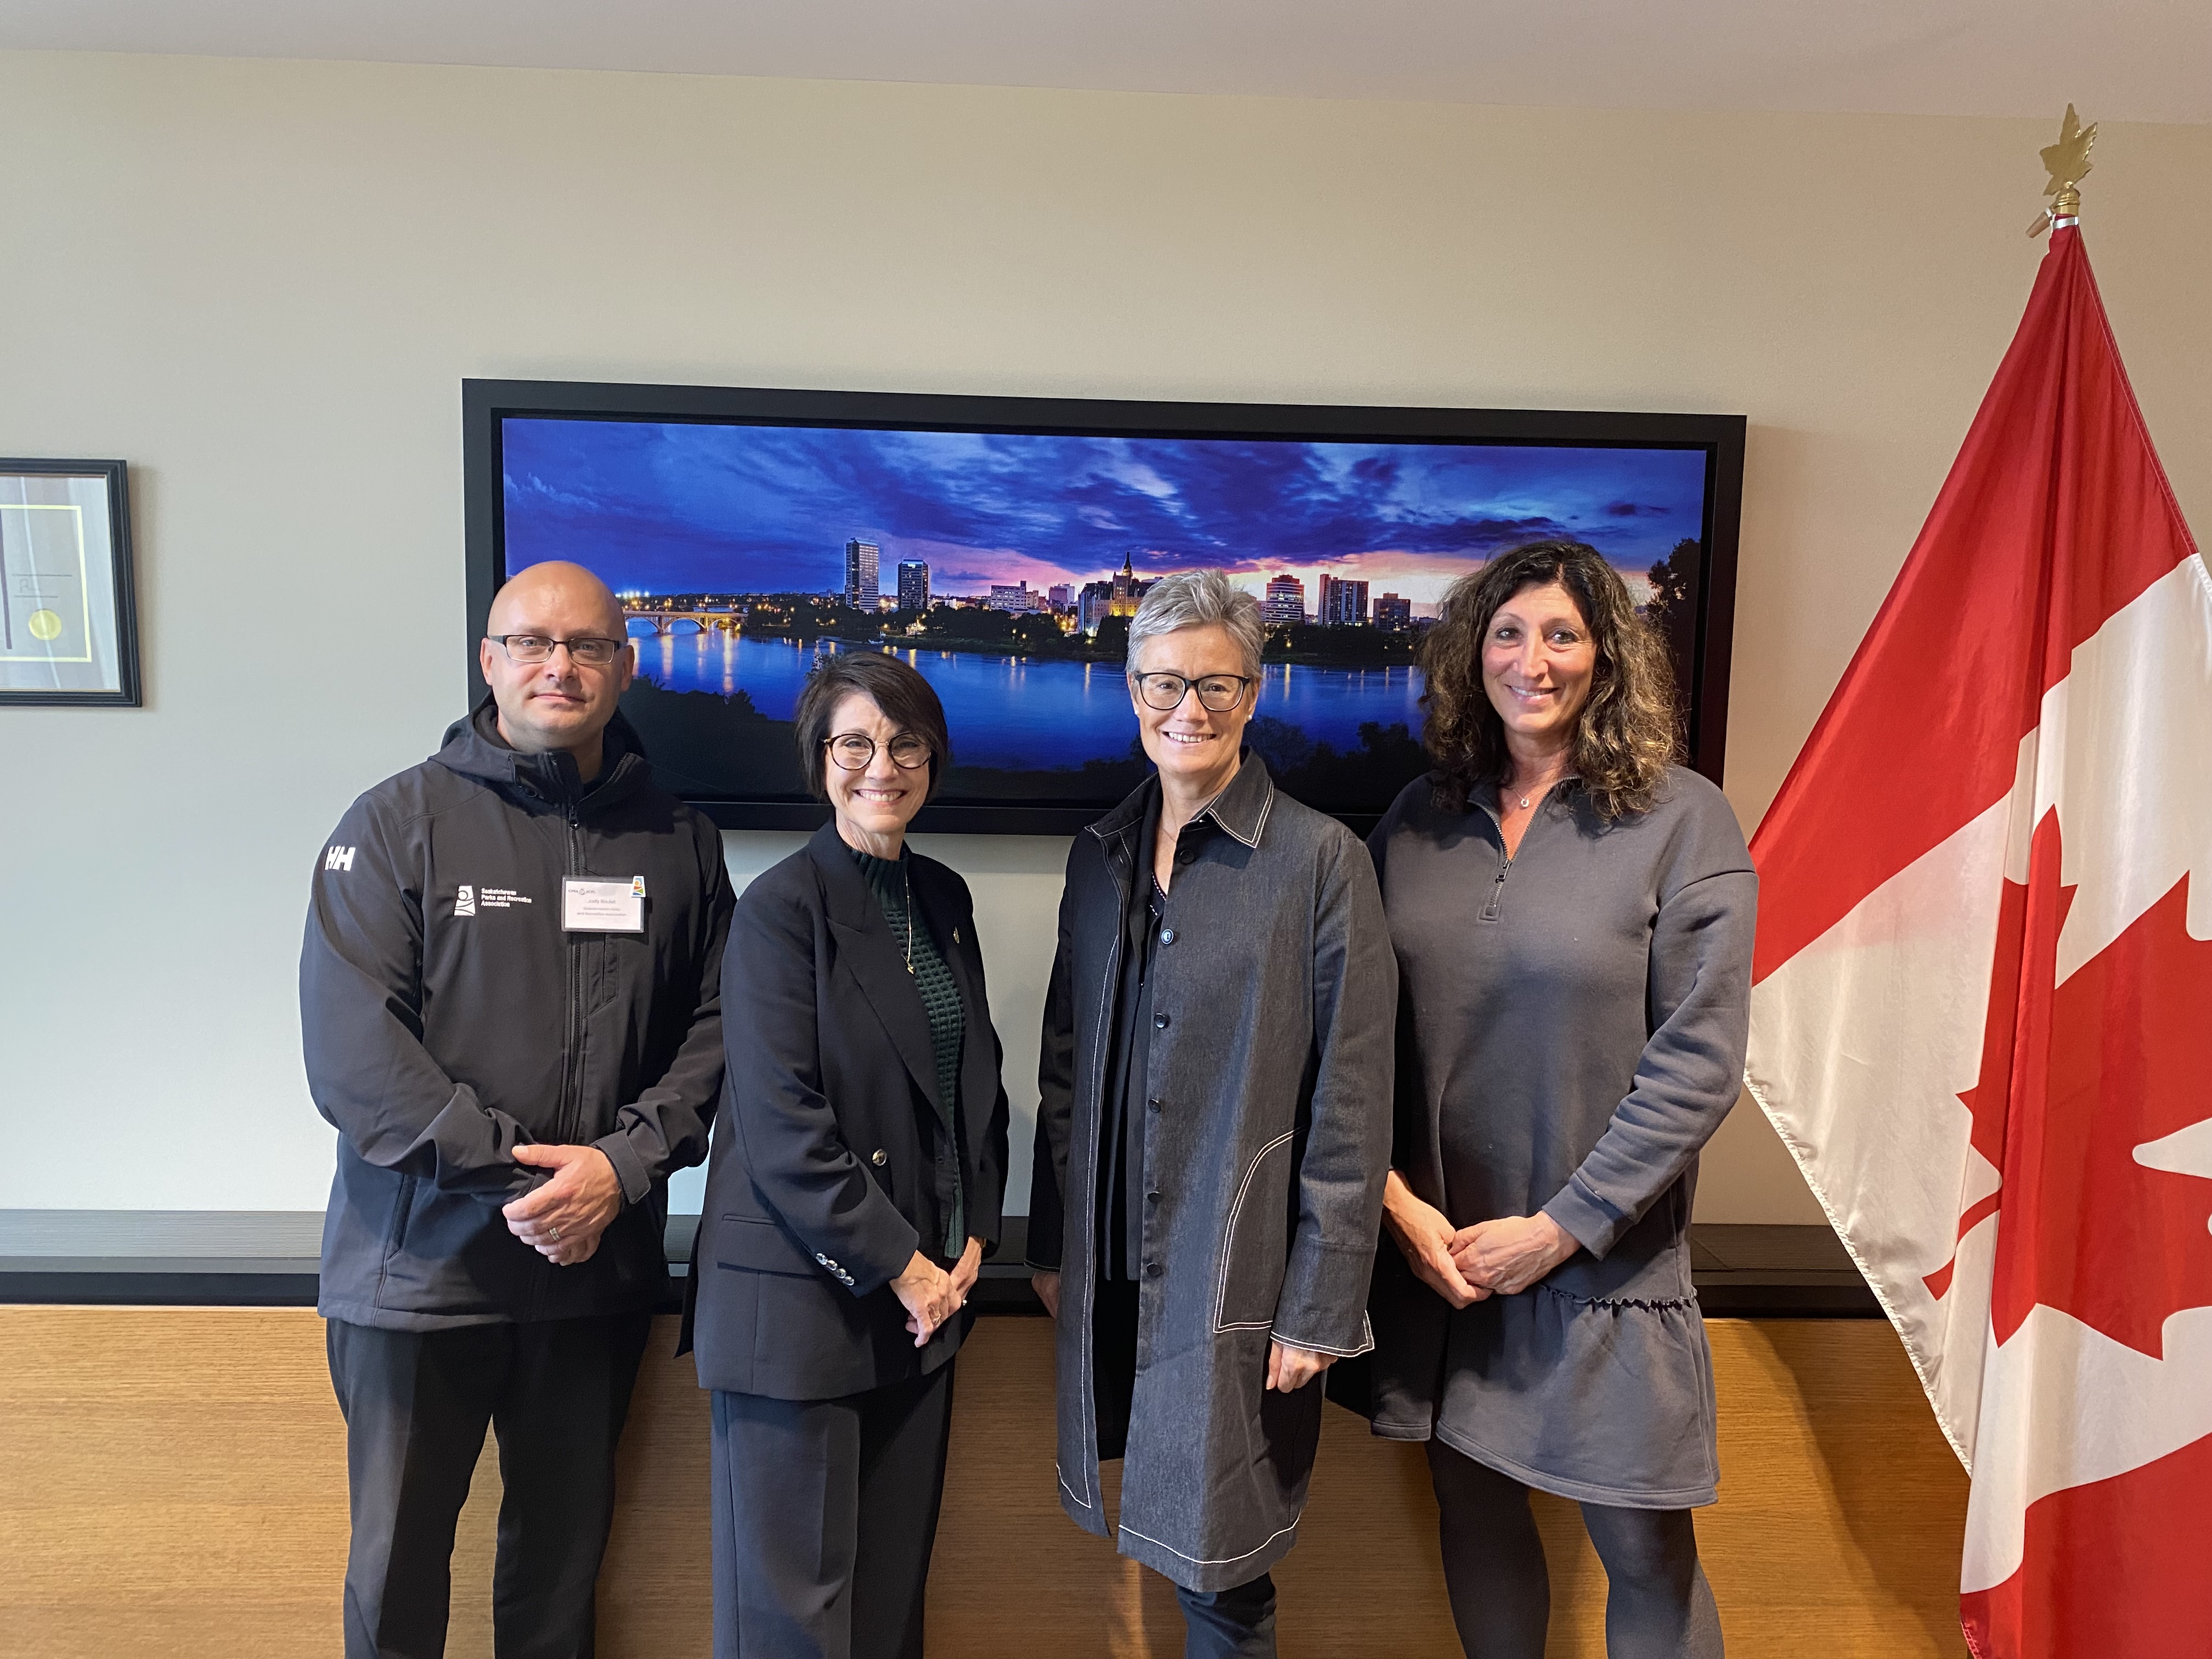 Left to right: Past SPRA President Jody Boulet, the Honourable Kelli Block, MP, Dawn Haworth, Canadian Academy of Sport and Exercise Medicine, and Christa Costas-Bradstreet, CPRA Director, Partnerships and Policy.